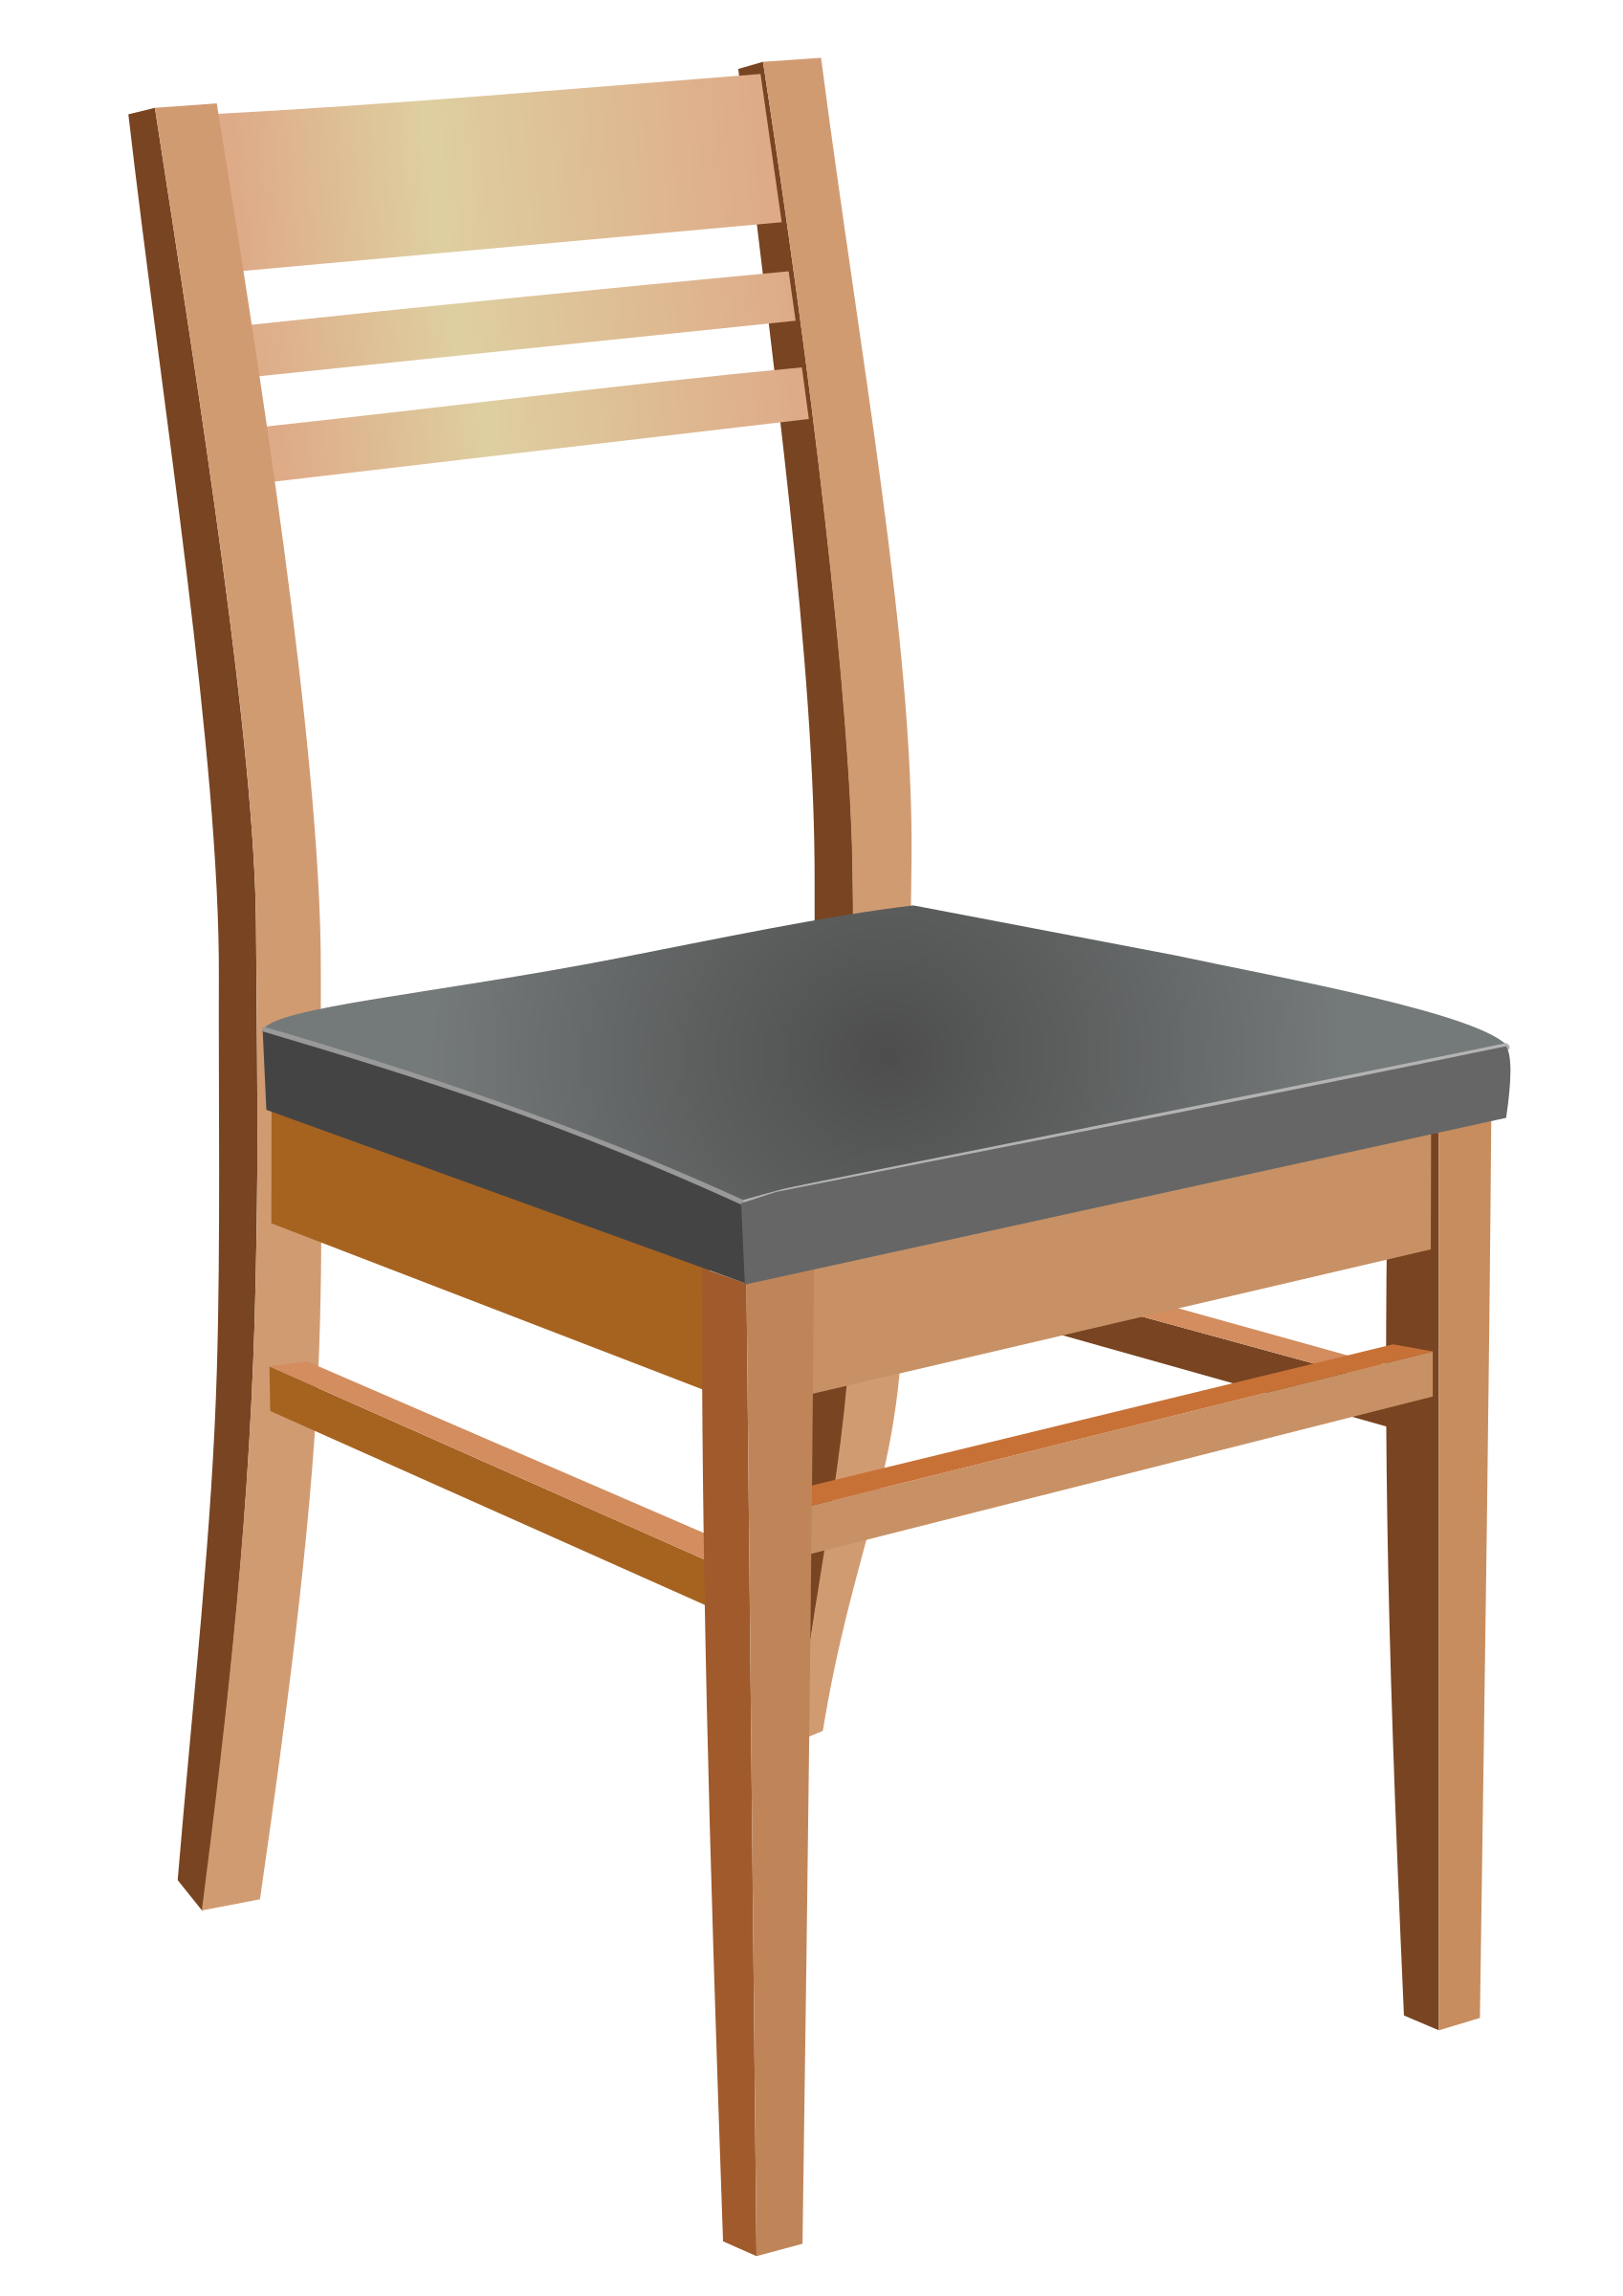 Clipart table table chair. Wooden big image png